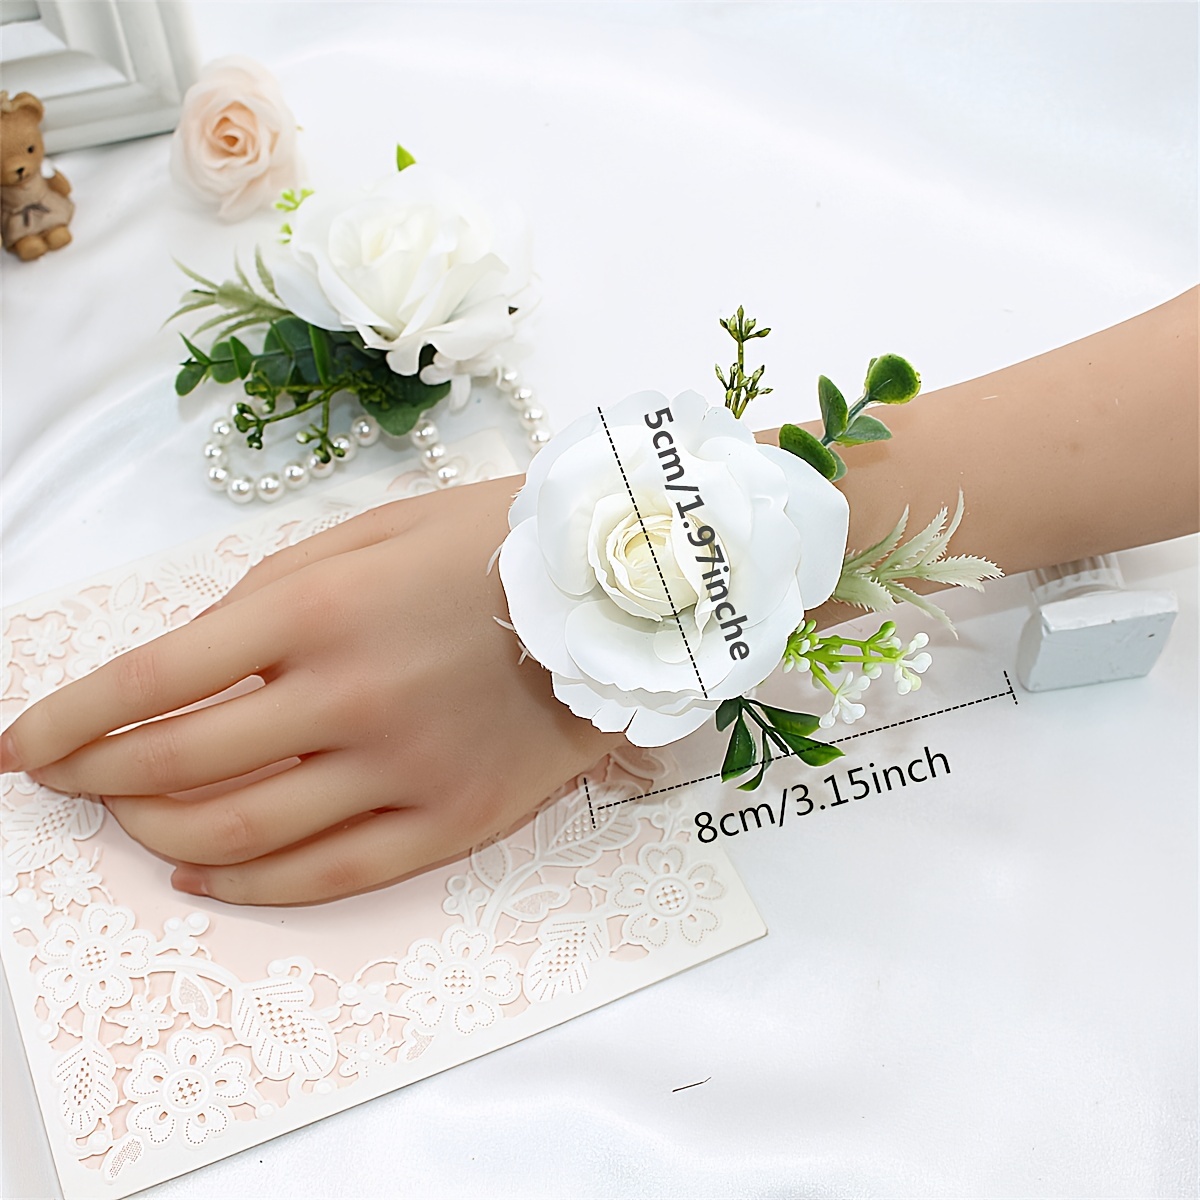 Wrist Flower, Rose Wrist Corsages, Wristband Hand Flowers Wrist Corsage  Bracelets, Corsage Wristlet Band For Wedding Bridesmaid Bridal Shower Prom  P